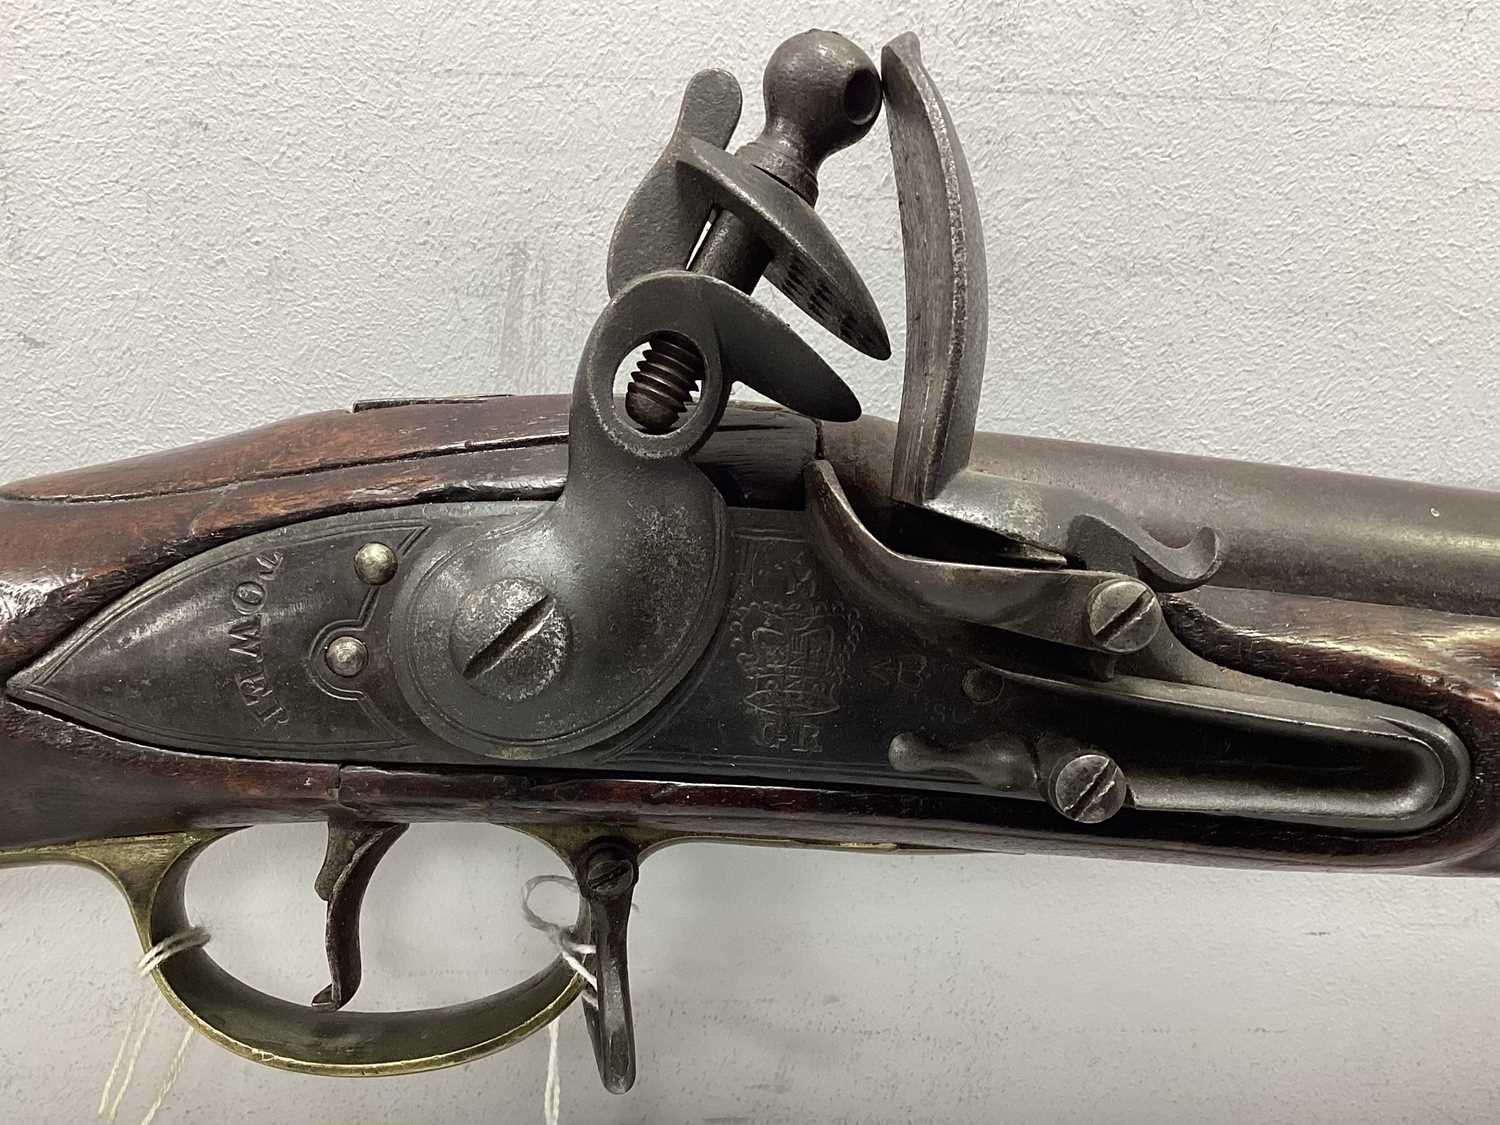 British India Pattern Circa 1810 'Brown Bess' Flintlock Musket, marked 'Tower' with 'GR' crown - Image 3 of 17